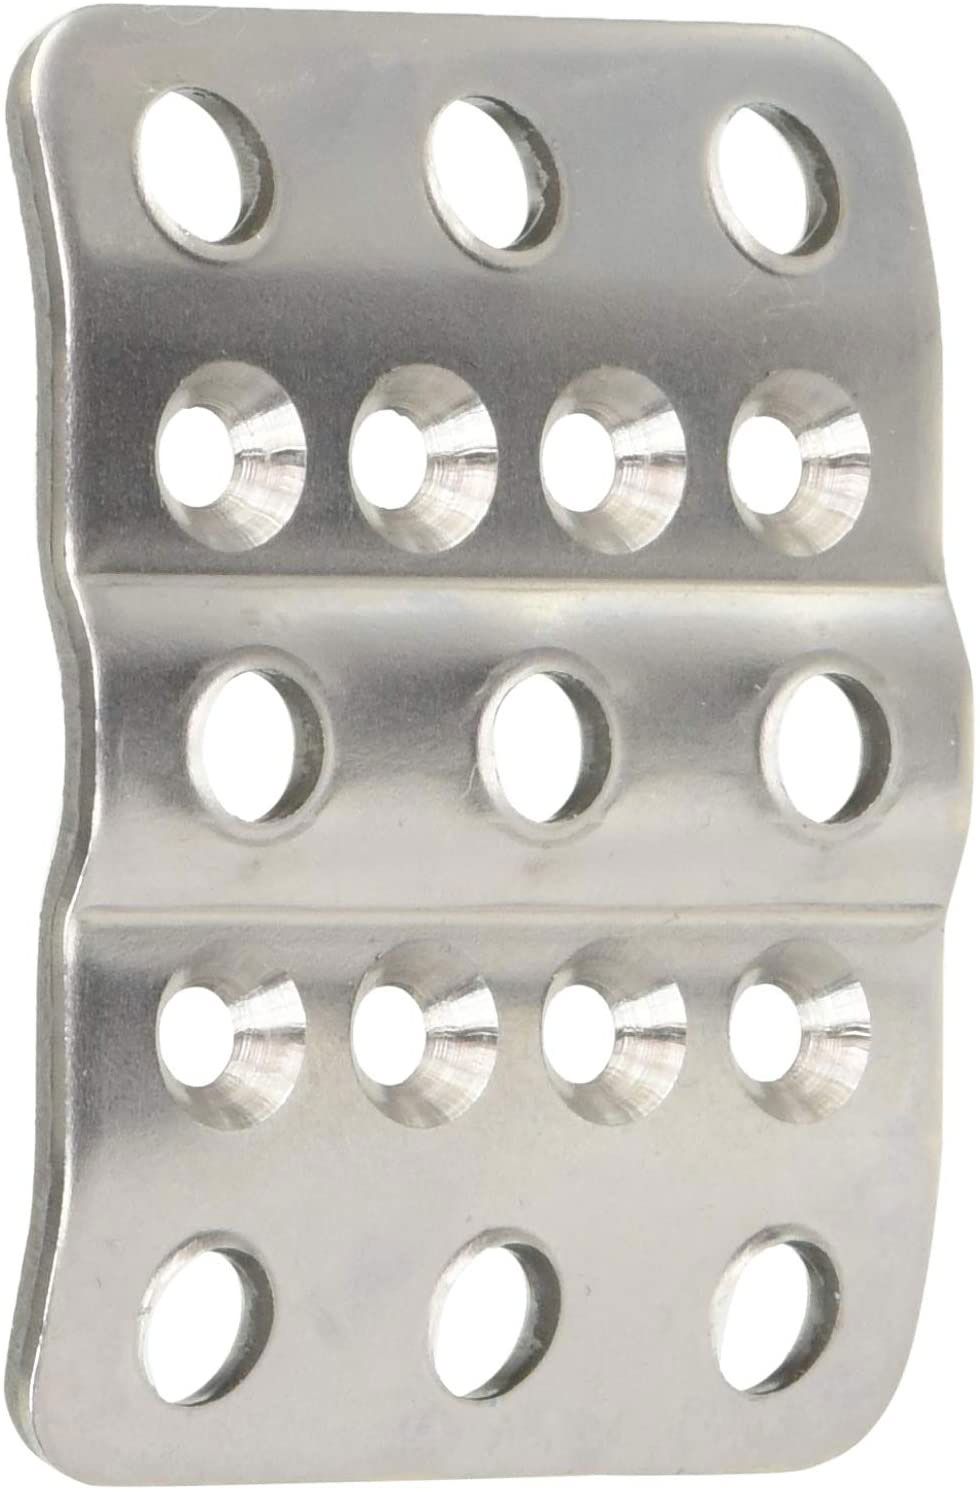 WB330-11280 - BOLT ON PEDAL PAD FOR WILWOOD